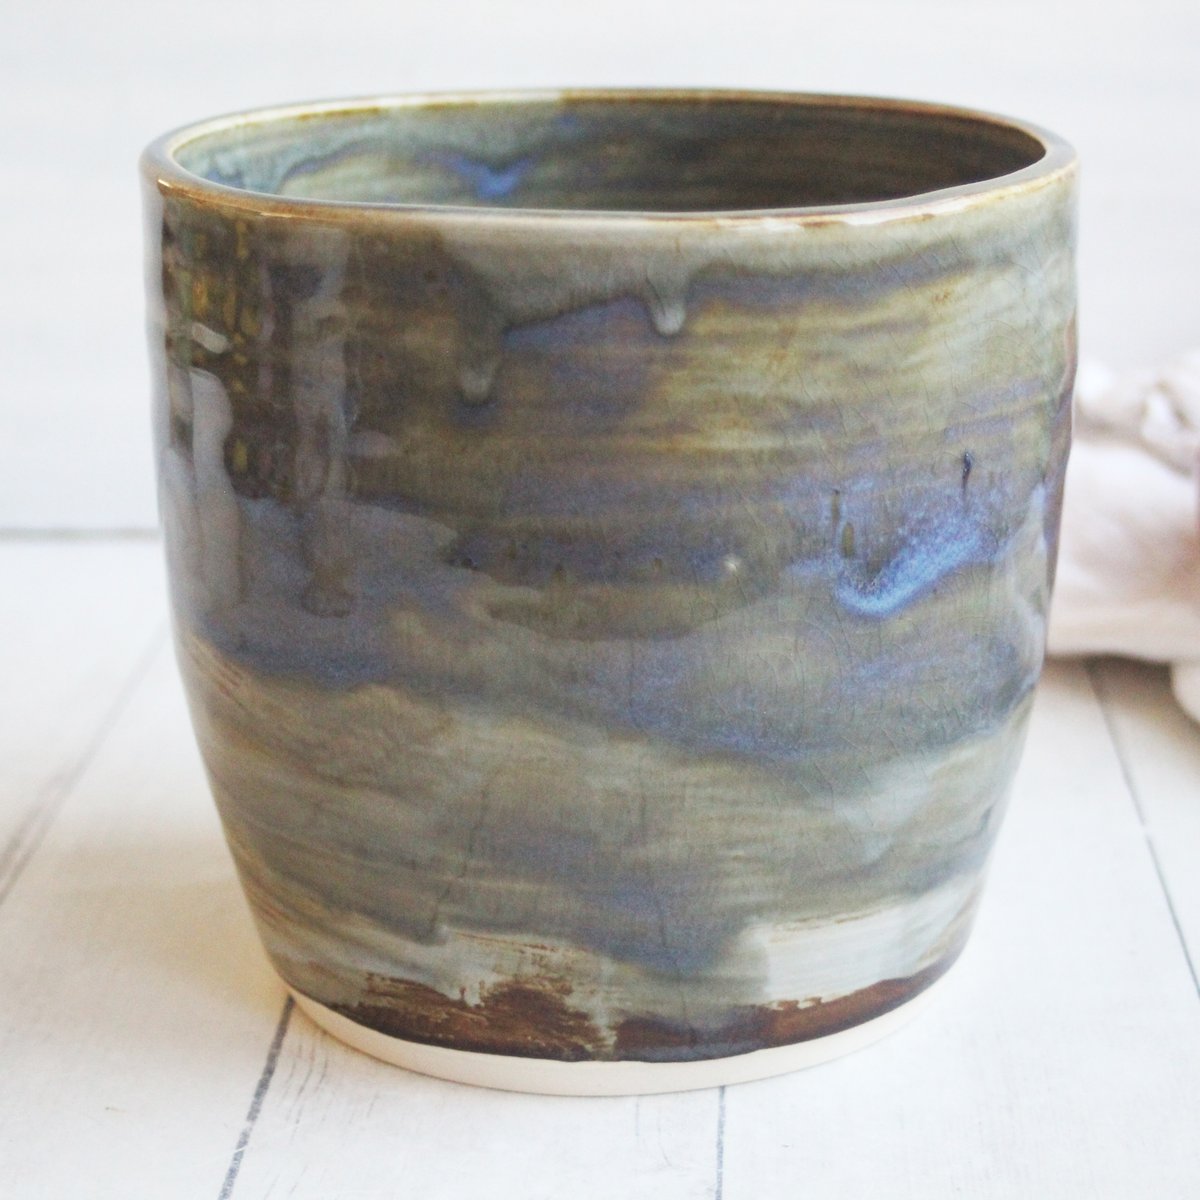 Andover Pottery — Large Rustic Utensil Holder with Raw Stone Texture,  Handcrafted Kitchen Crock, Made in USA